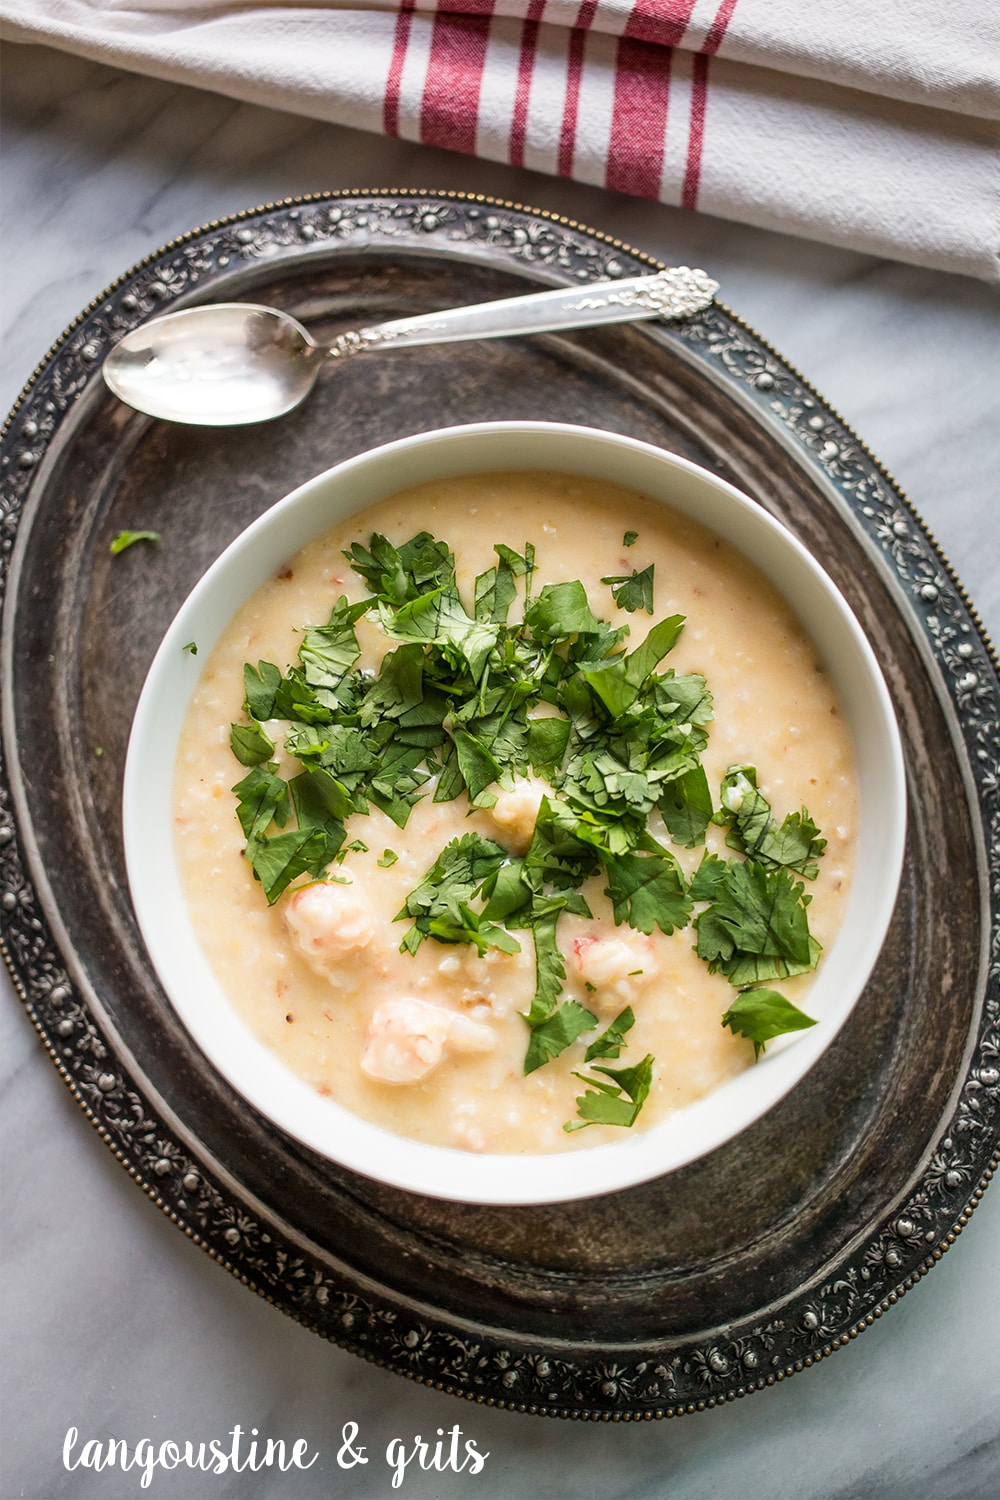 Langoustine and grits- this fun twist on a southern classic is cheesy and delicious!